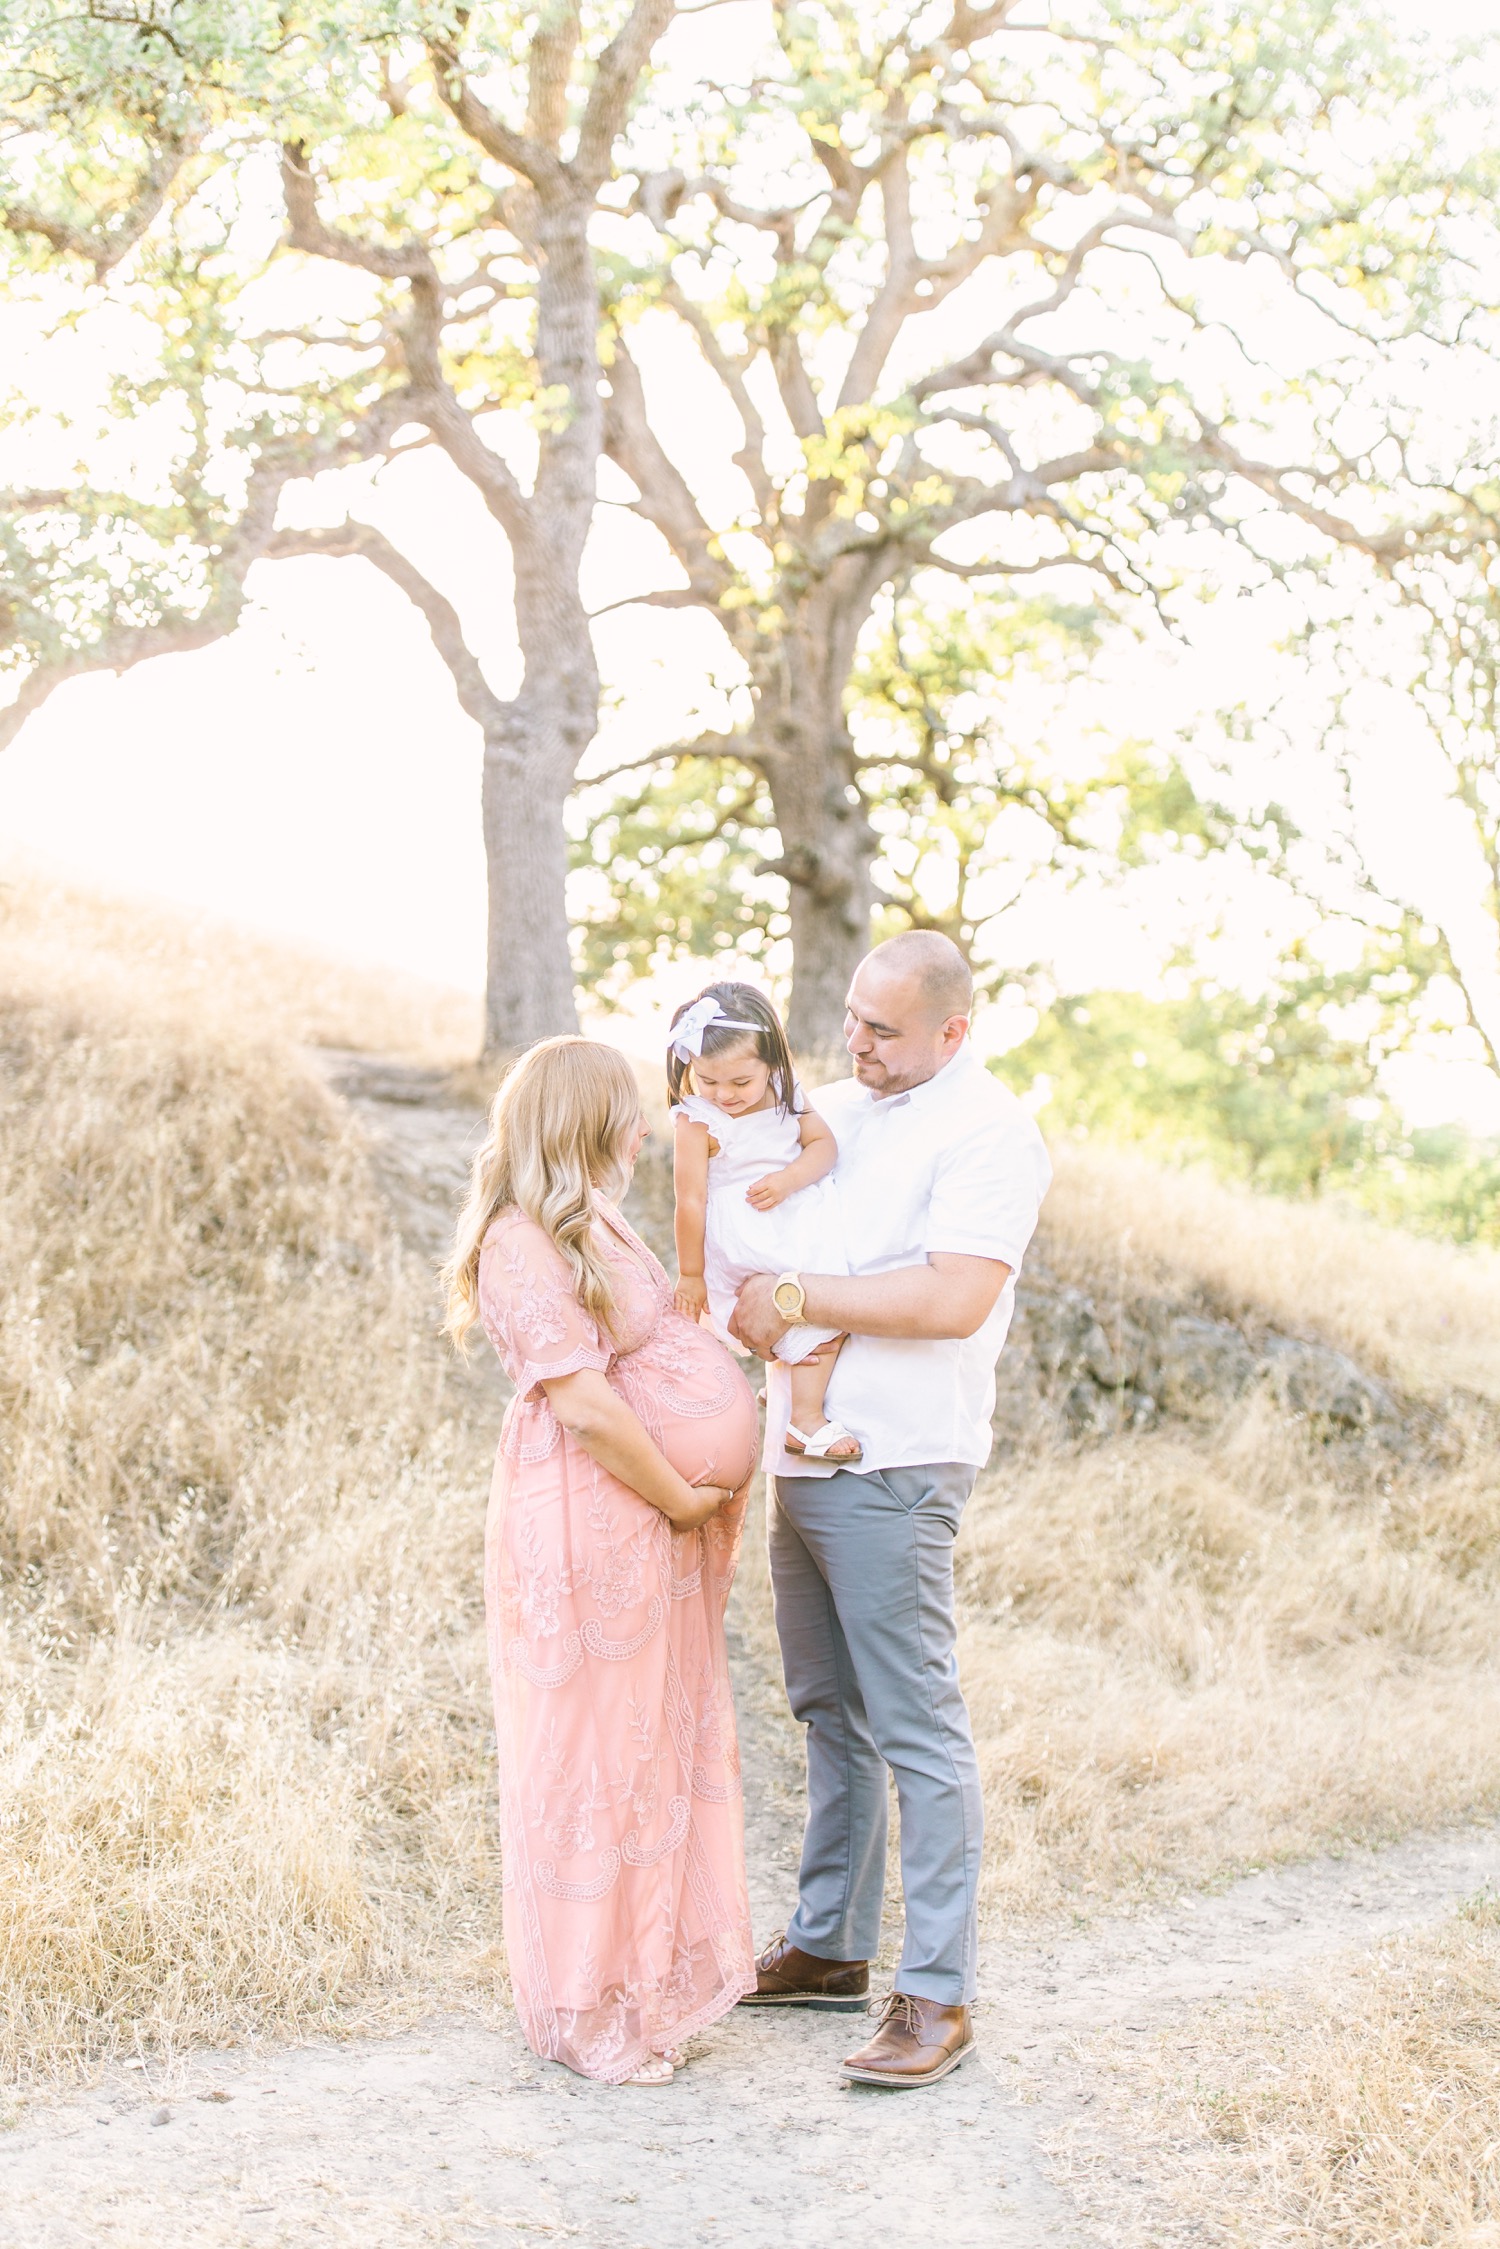 Our top 10 maternity picture ideas | Stephany Ficut Photography